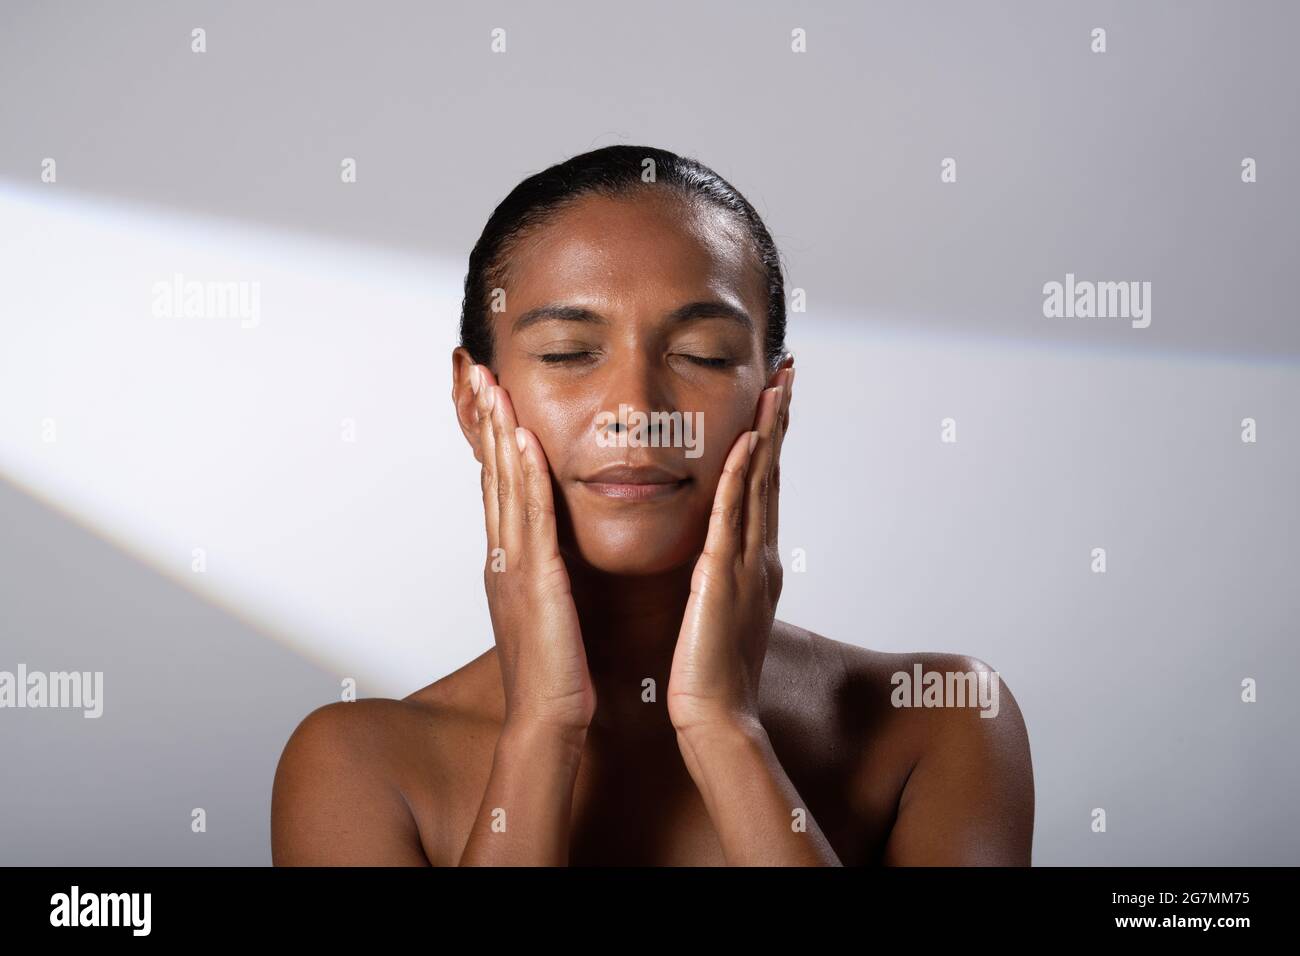 Beauty images of a woman with darker skin tone. Head and shoulder pictures of smiling, happy lady. Face massage/cream application. Stock Photo